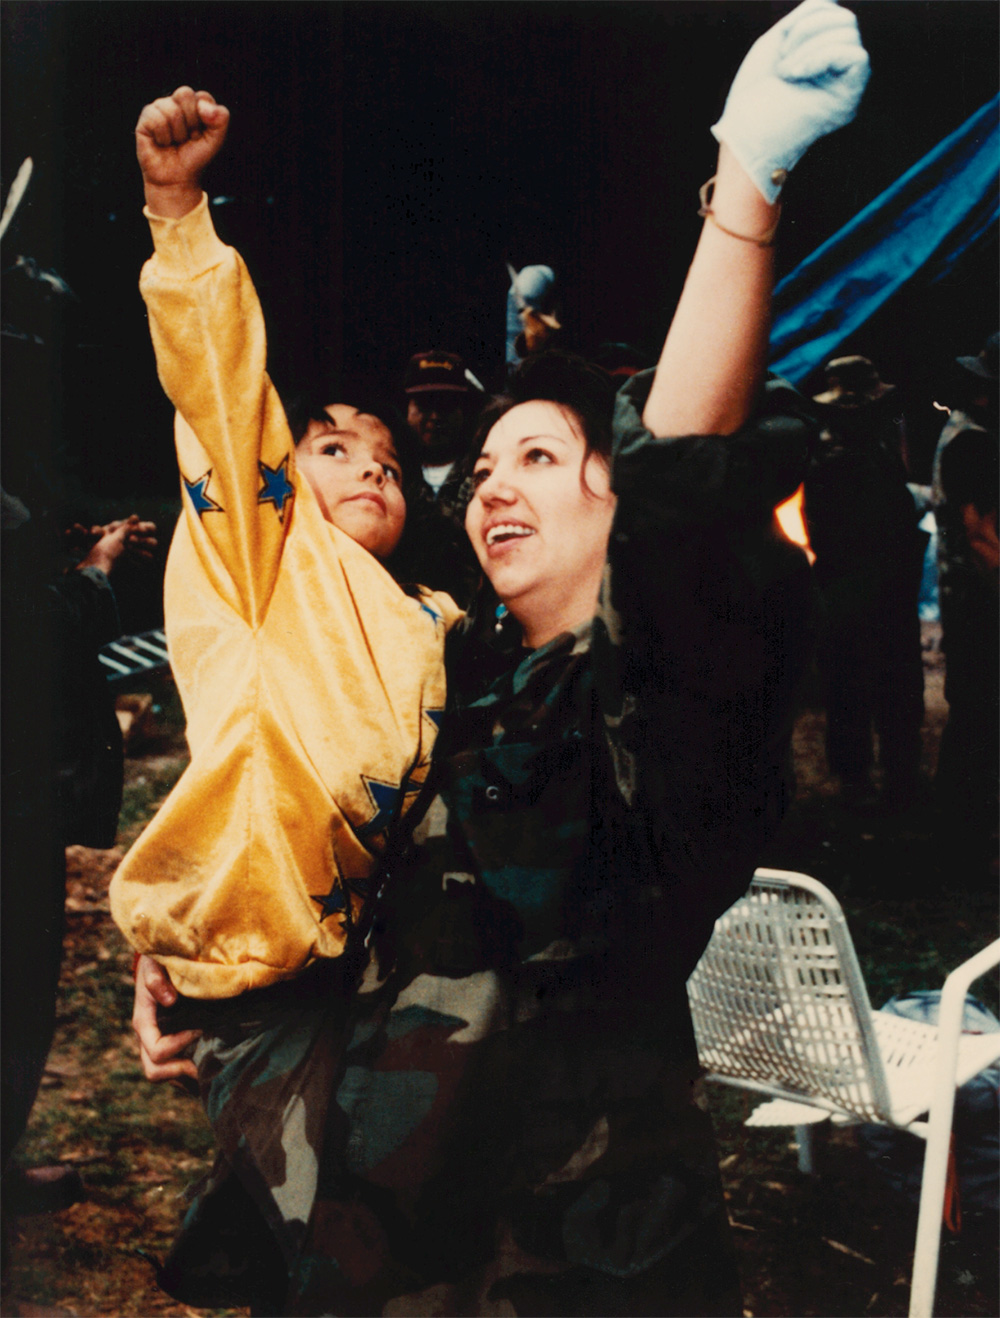 Photo of a woman holding a young child in her arms. They are both raising an arm, their hands in fists, and looking up. The woman is wearing camo print and the child is wearing a bright yellow sweater with blue stars.